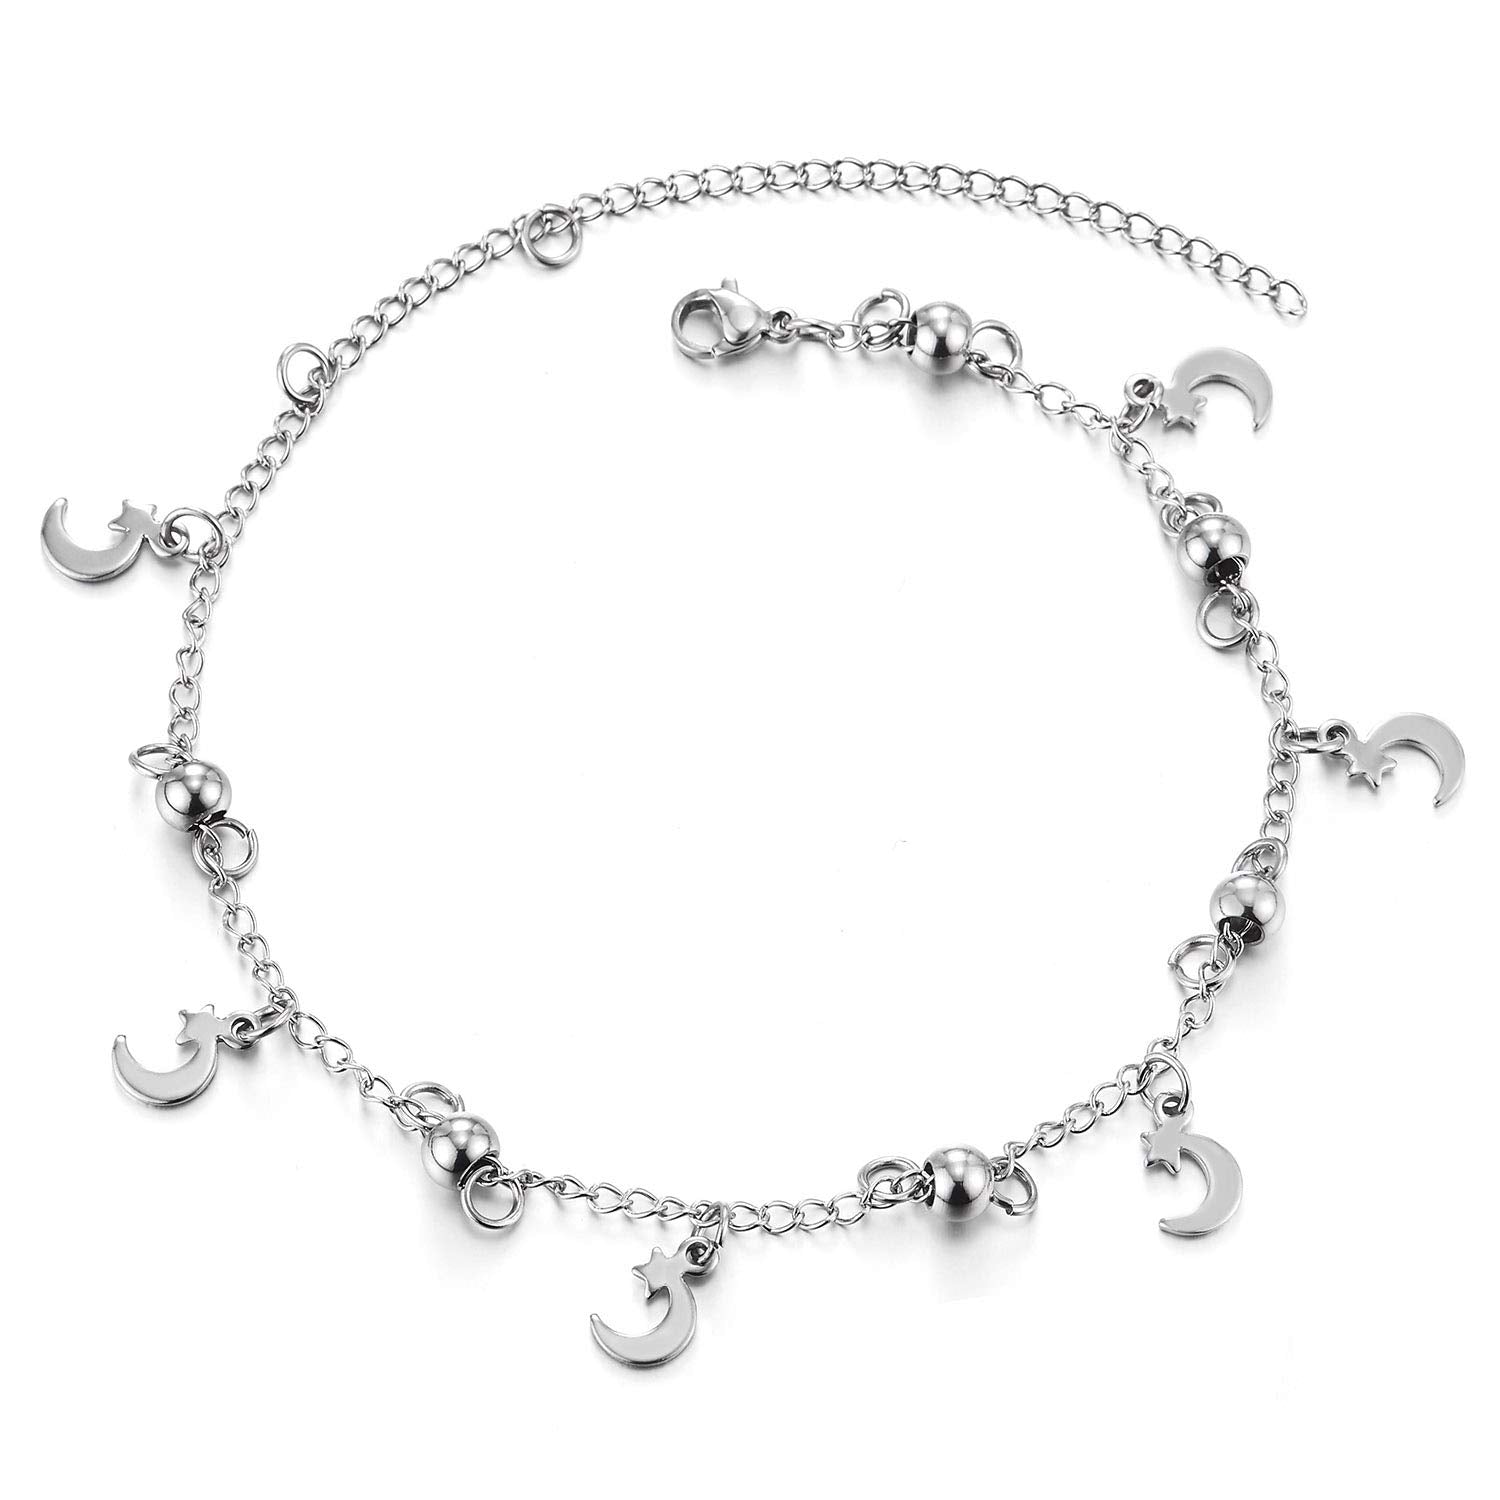 Stainless Steel Link Chain Anklet Bracelet with Balls and Dangling ...